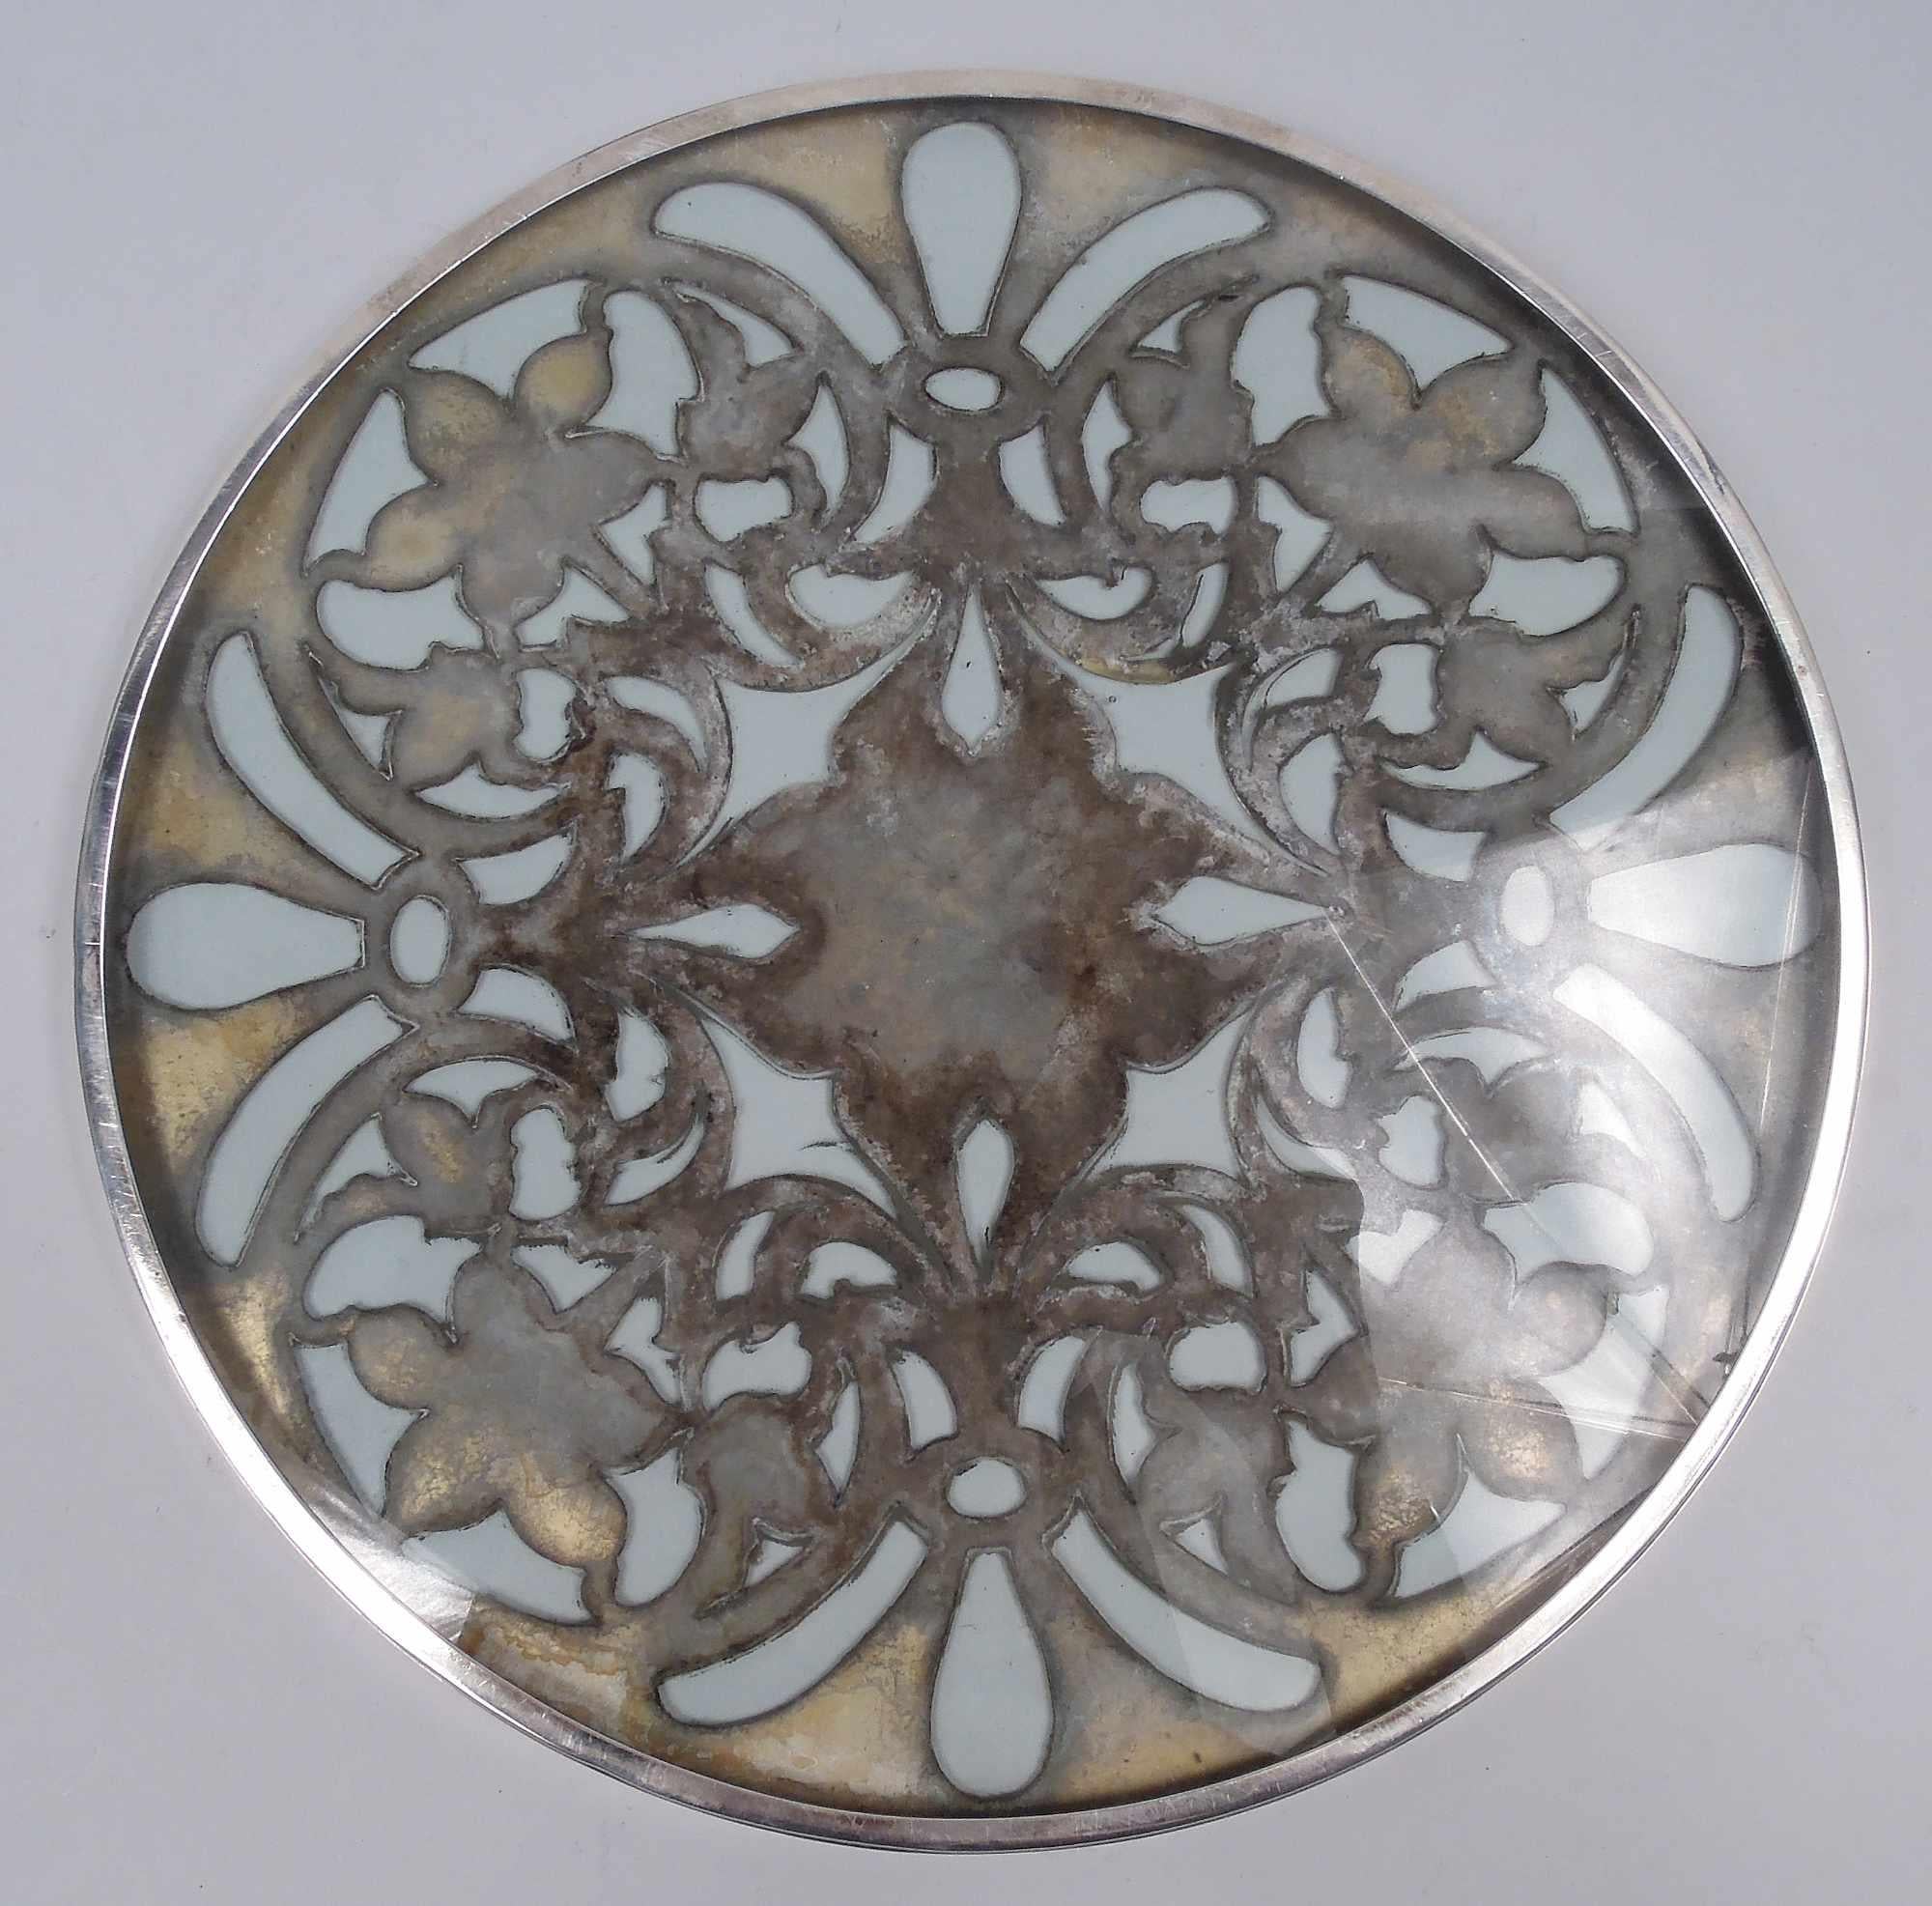 American Art Nouveau glass trivet with engraved silver overlay, ca 1900. Round with straight sides. Overlay in scroll and flower pattern with alternating flowers in round tendril-entwined frames and fleurs de lys. Sold center engraved with